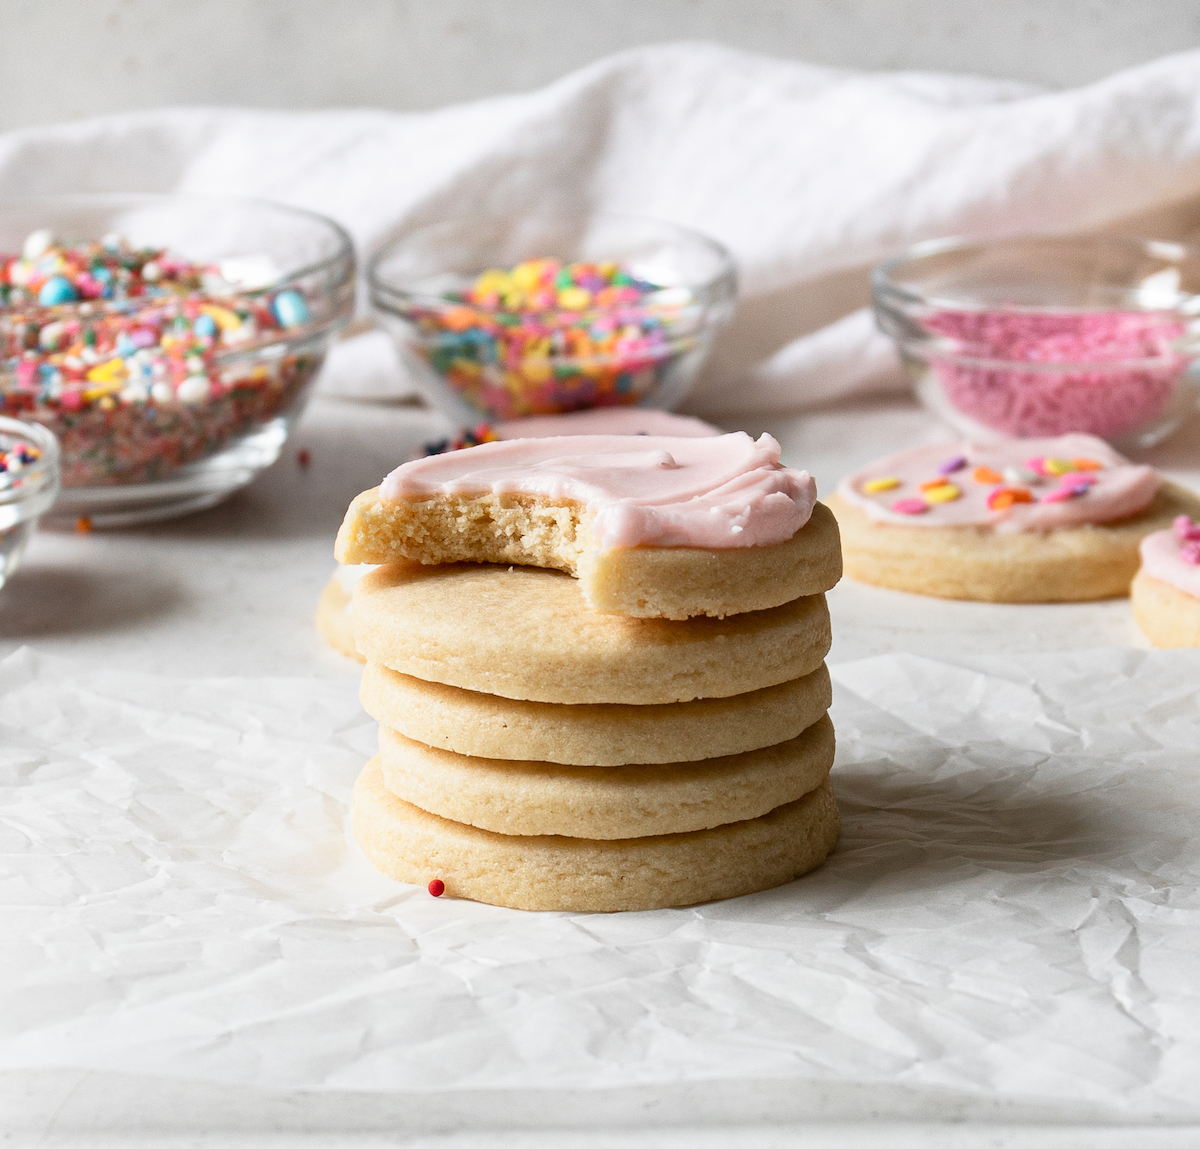 A stack of sugar cookies, one with pink frosting.